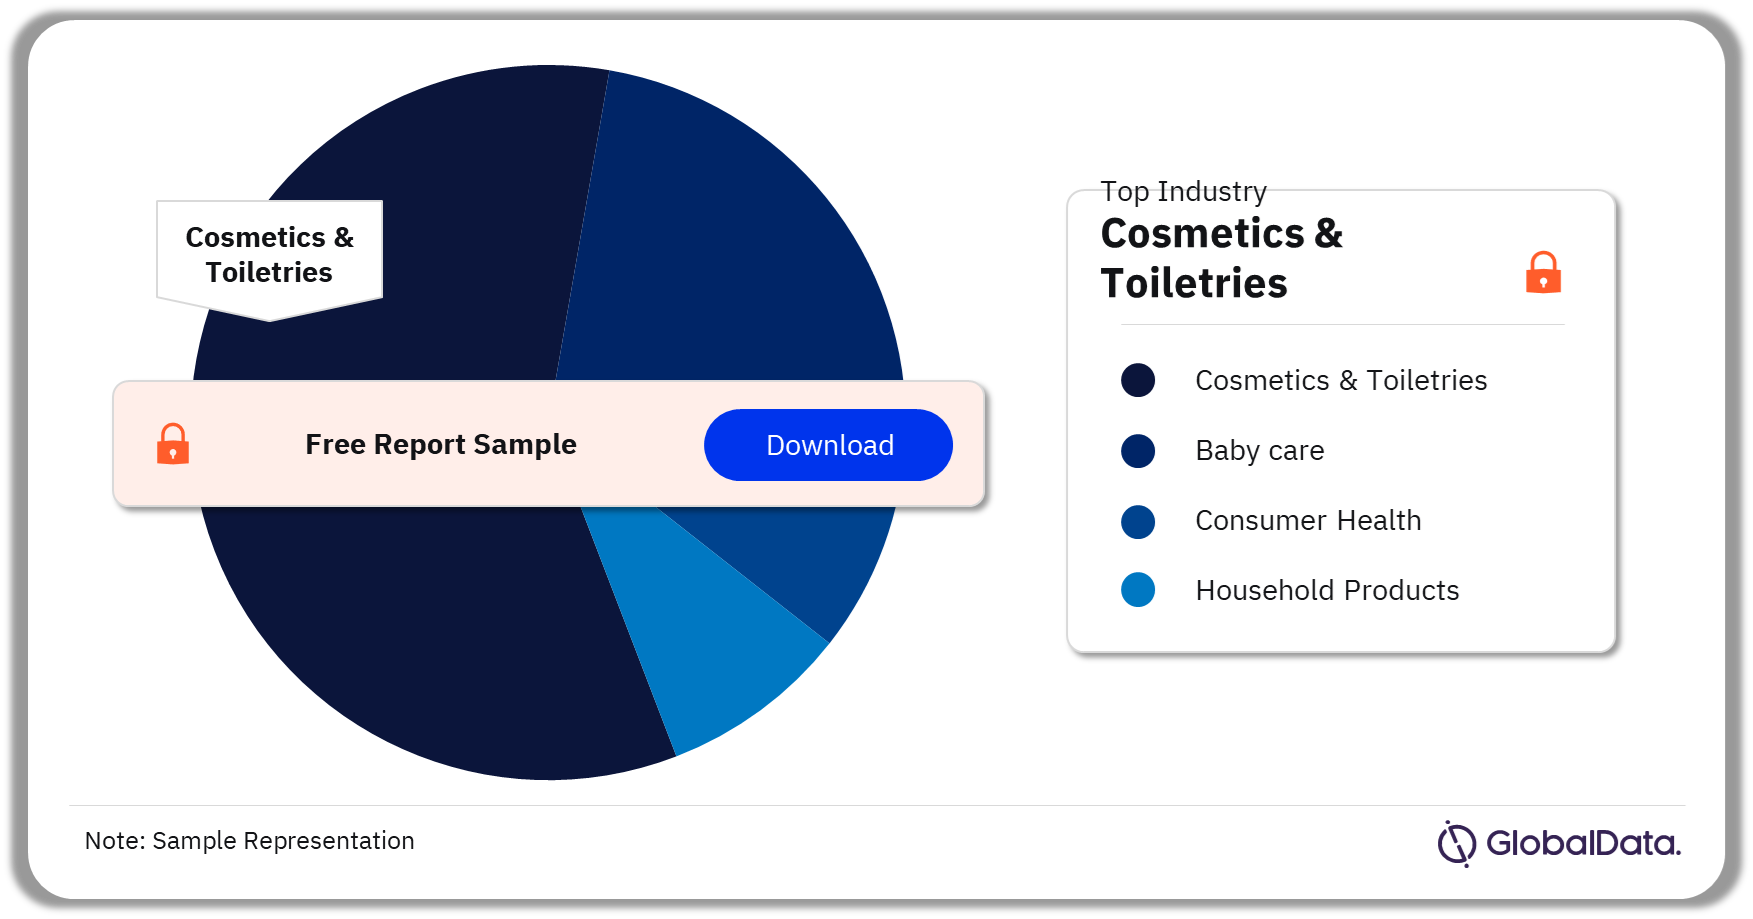 Procter & Gamble Company Analysis by Sectors, 2021 (%)